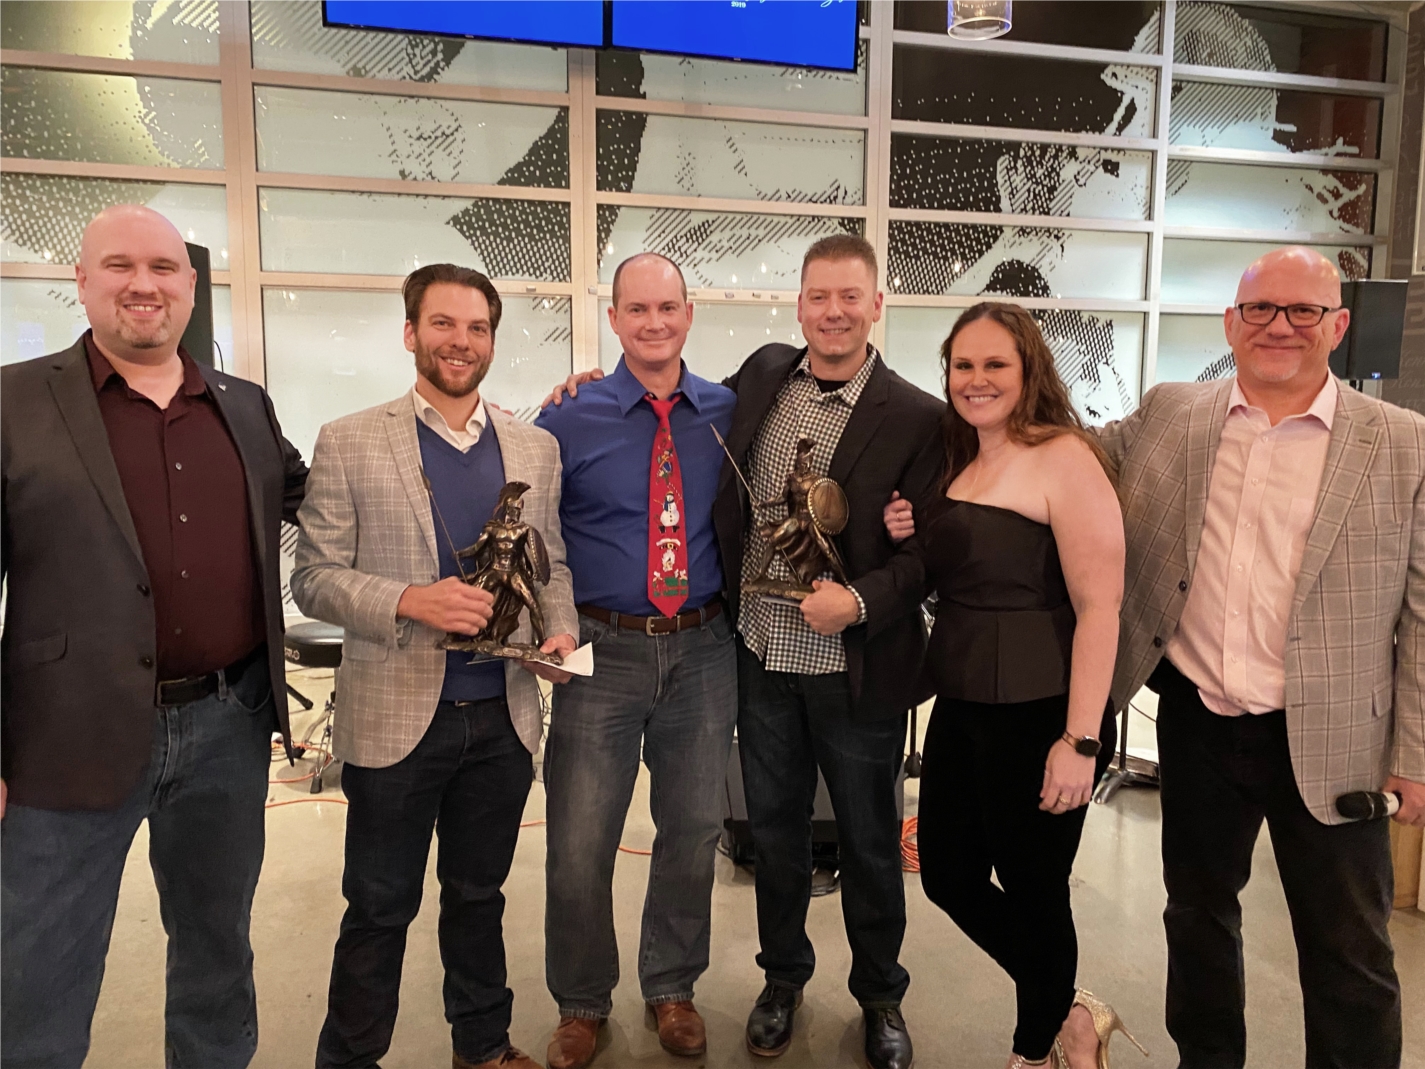 The most prestigious honor that can be bestowed upon a Blue Chip is the title of Spartan of the Year. The Spartan of the Year Award is presented to employees who embody all that it means to be a Blue Chip. Pictured here are Blue Chip's 2019 award winners.